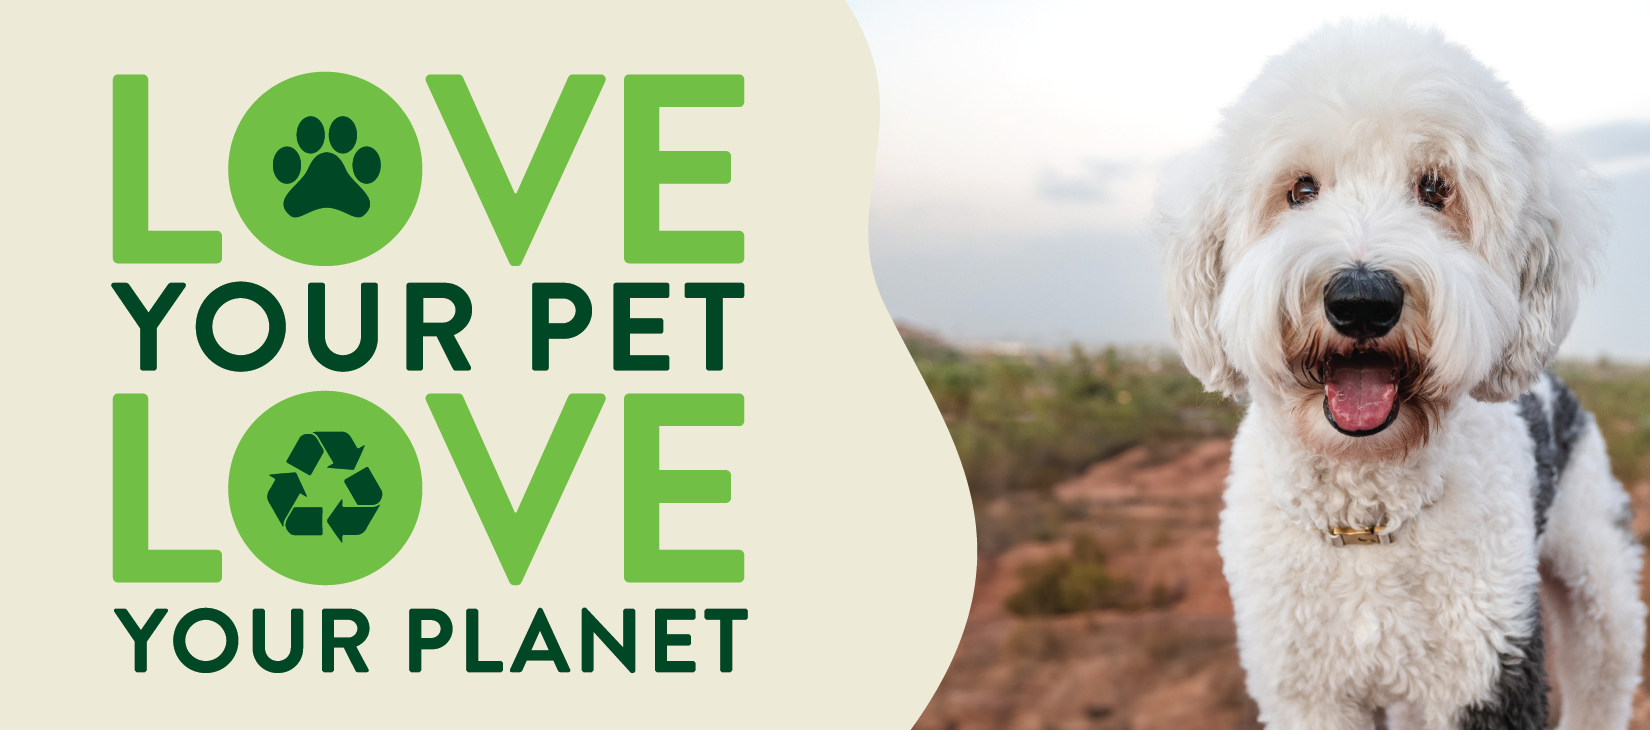 Love your pet, love your planet